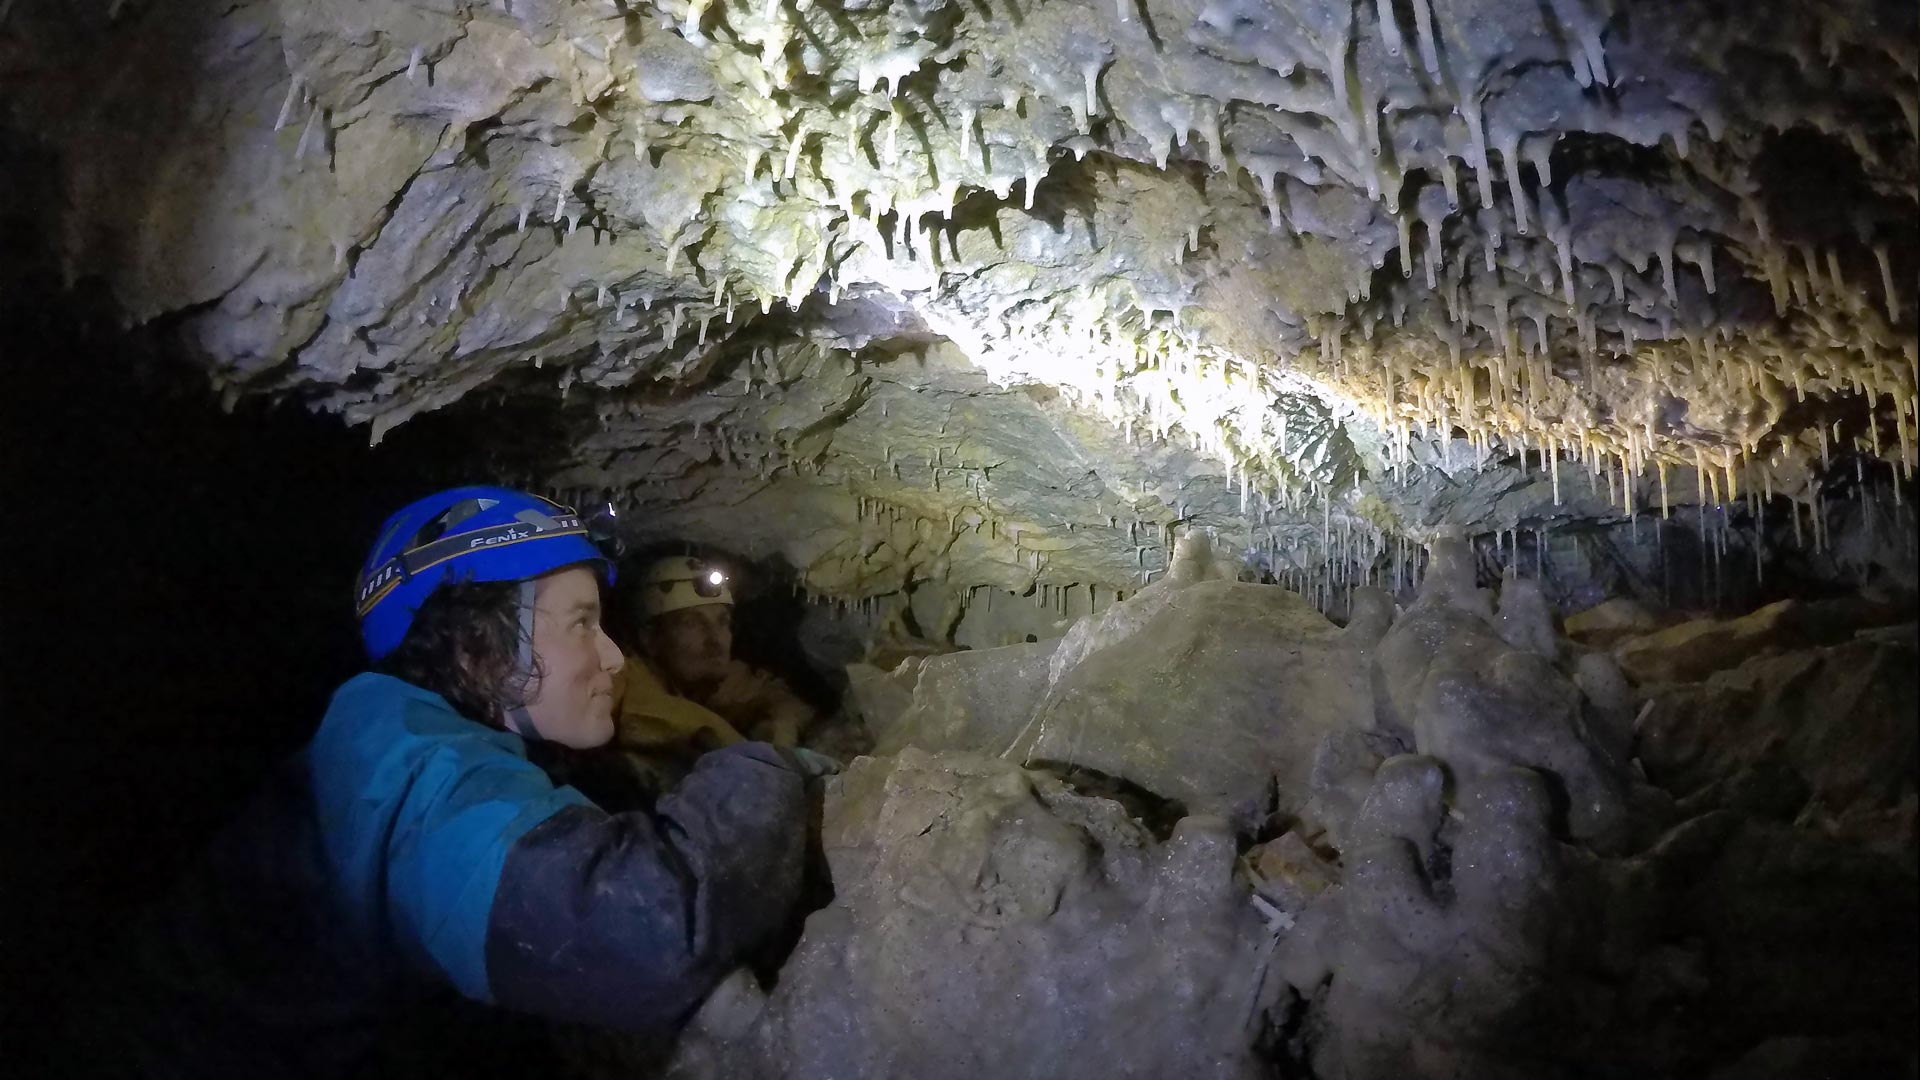 Dr Bethany Fox conducting research in a cave in New Zealand